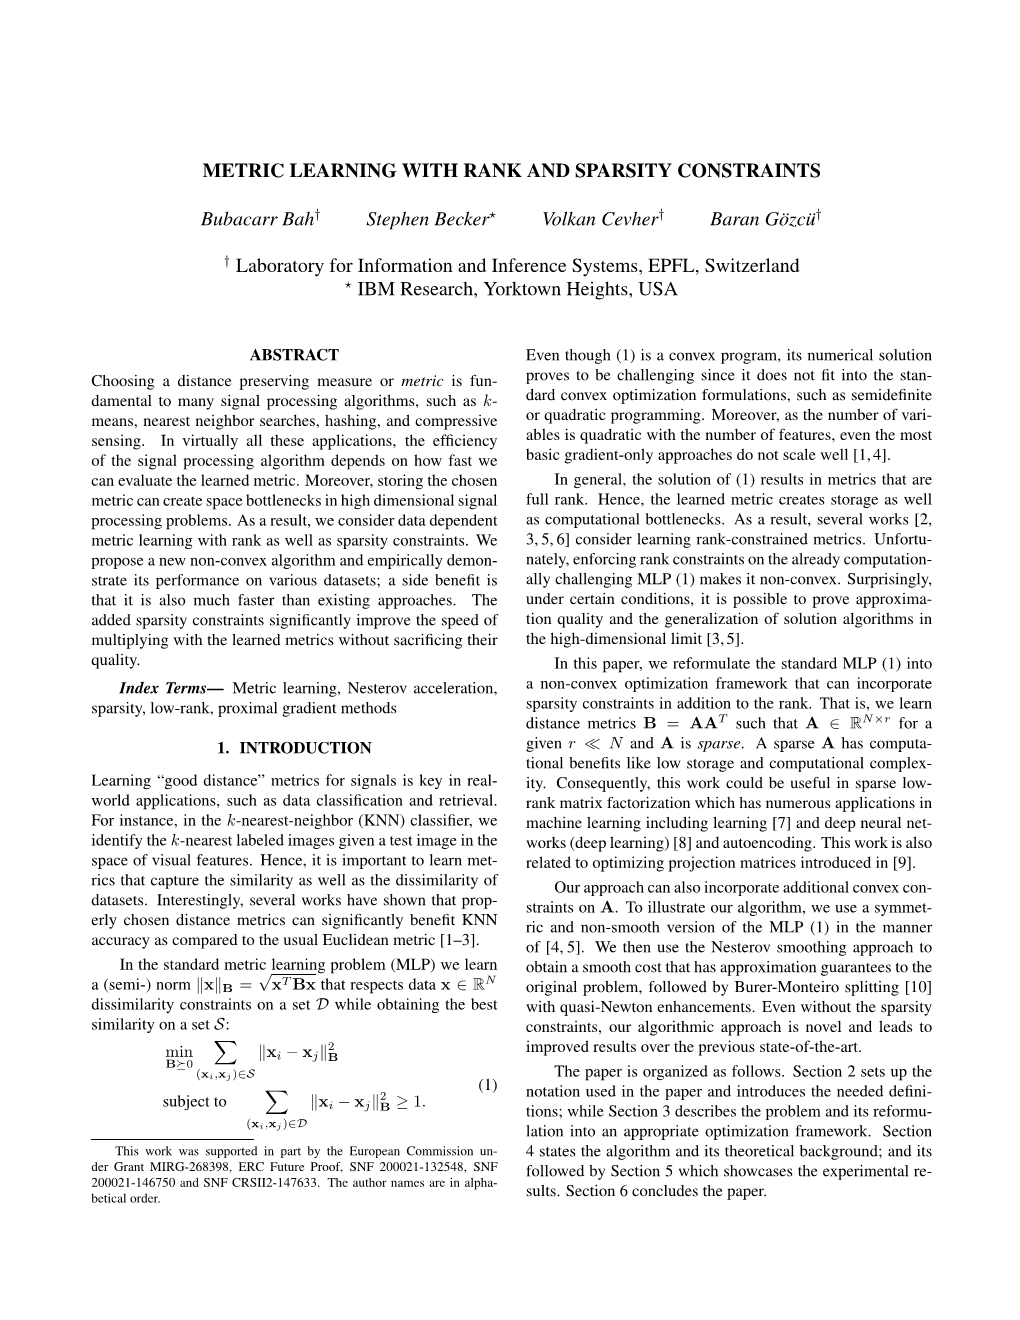 Metric Learning with Rank and Sparsity Constraints